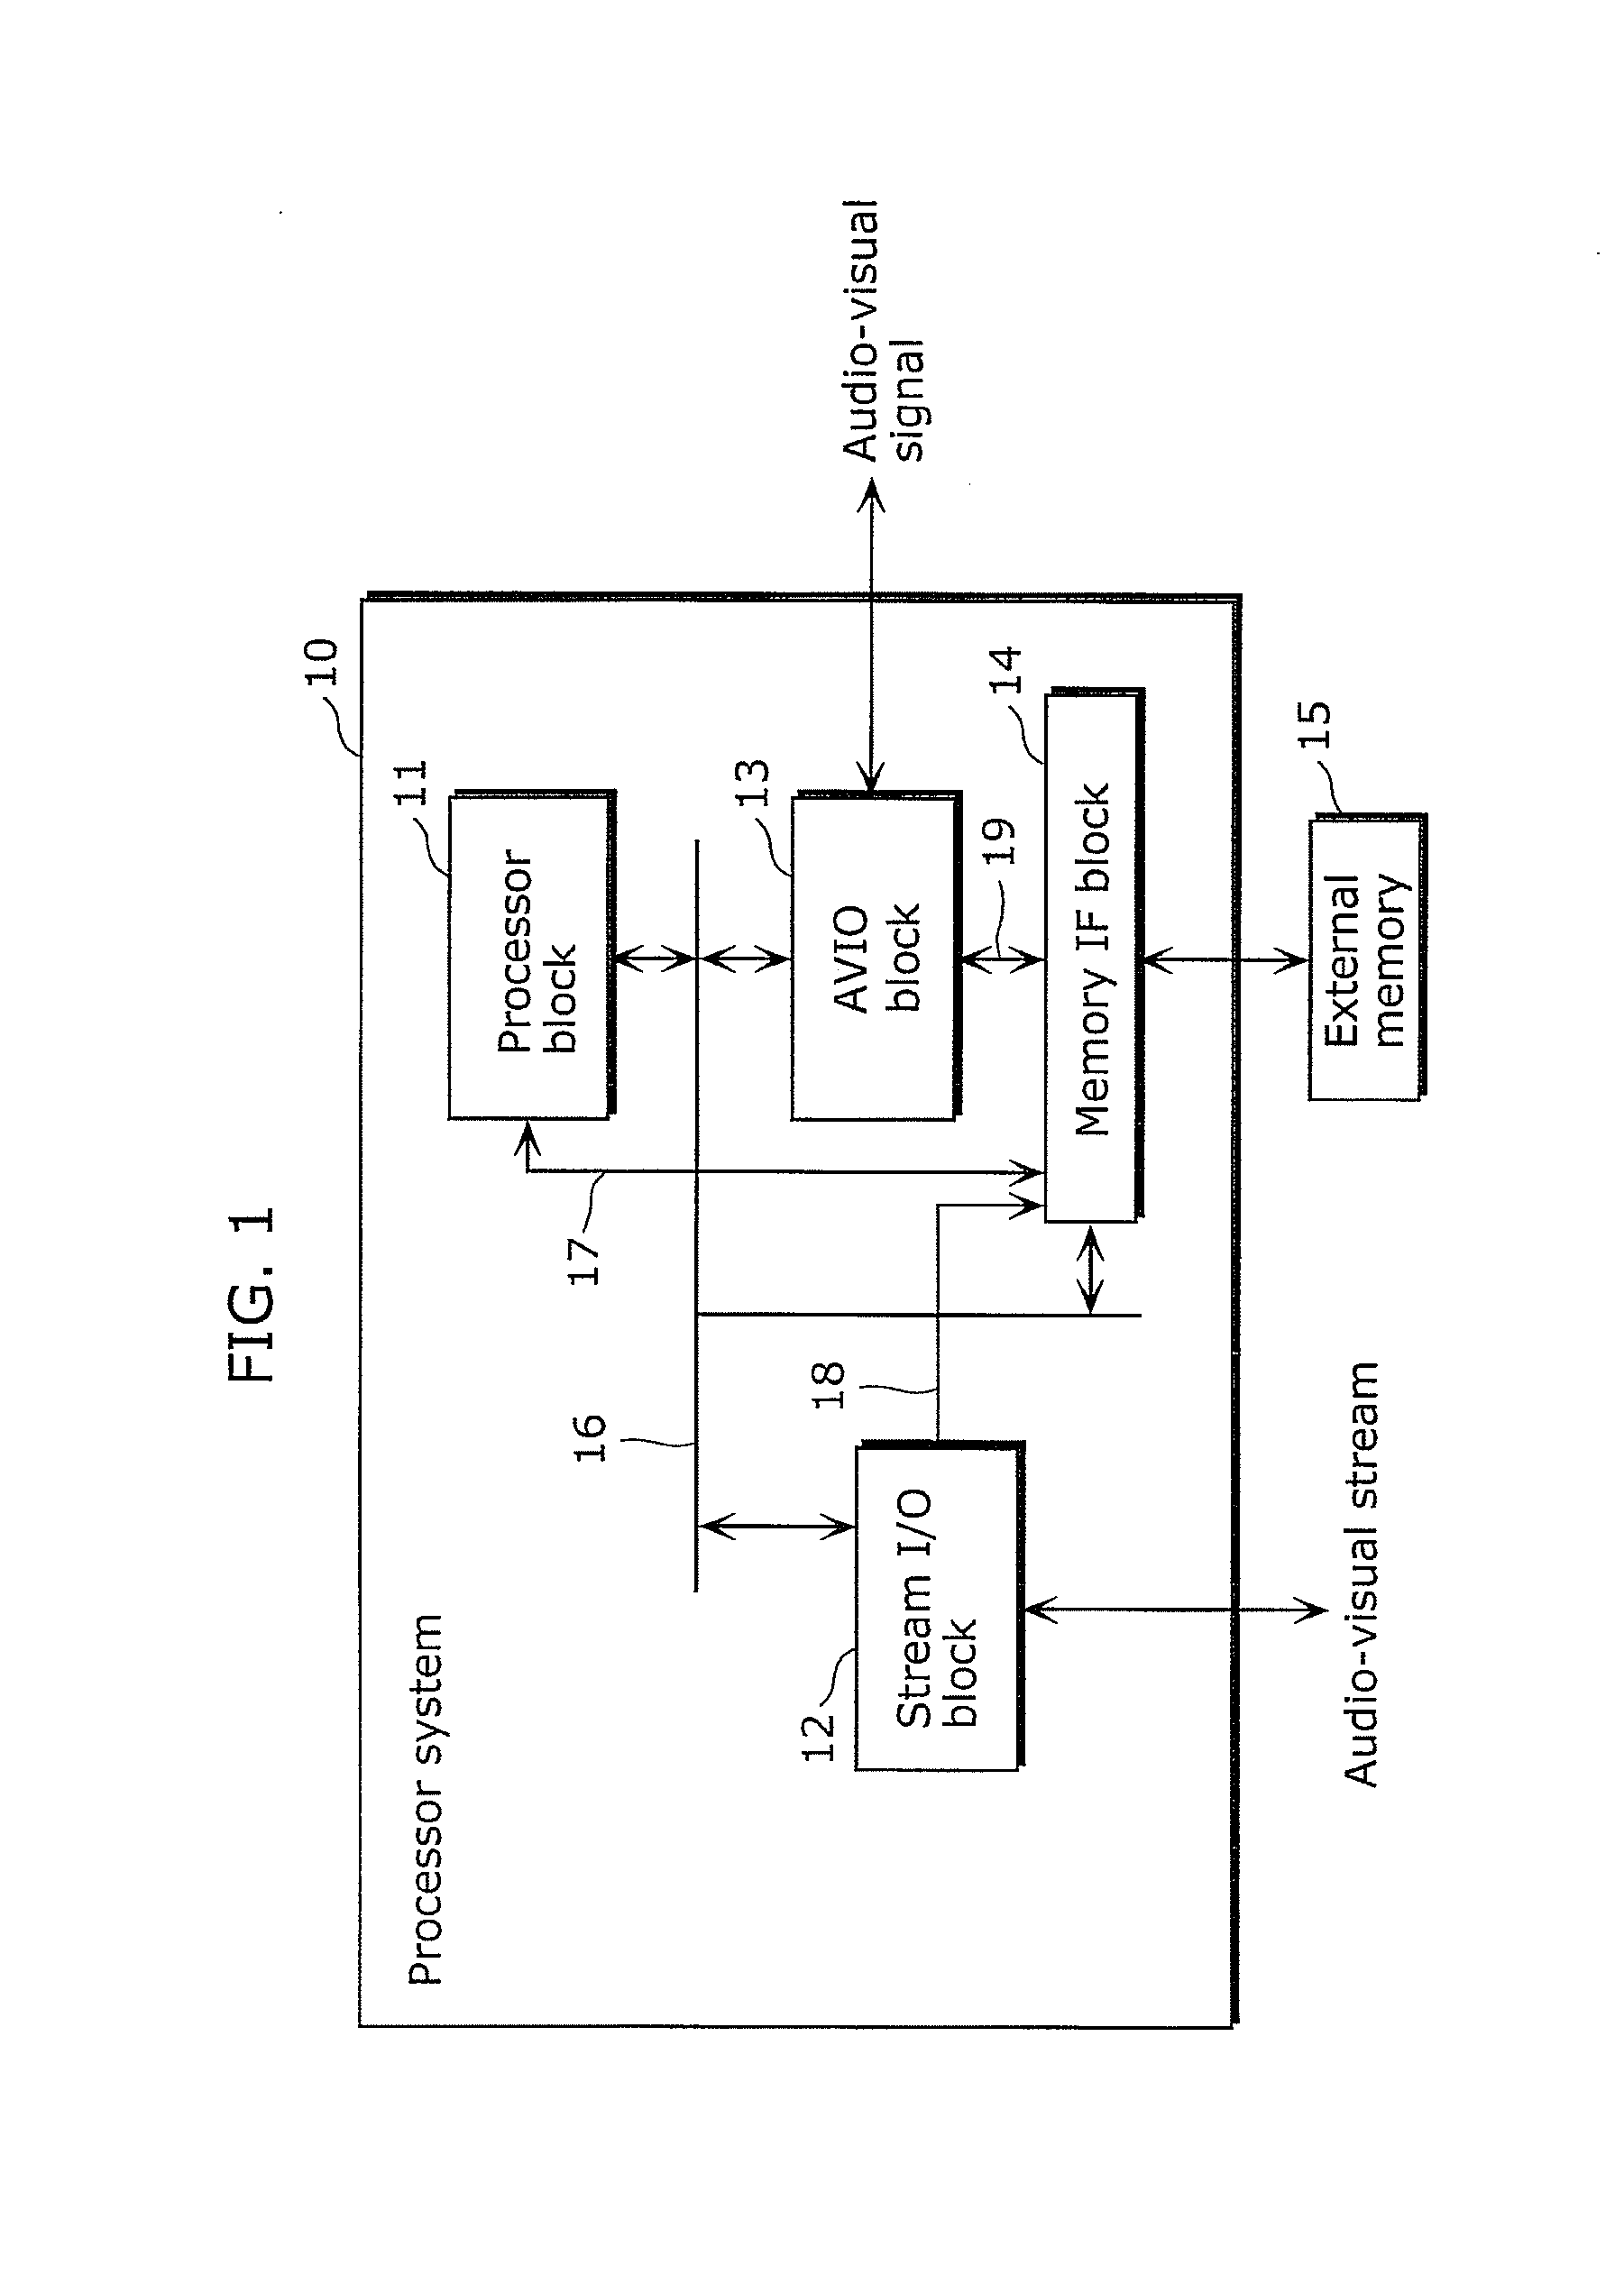 Multithread processor and digital television system